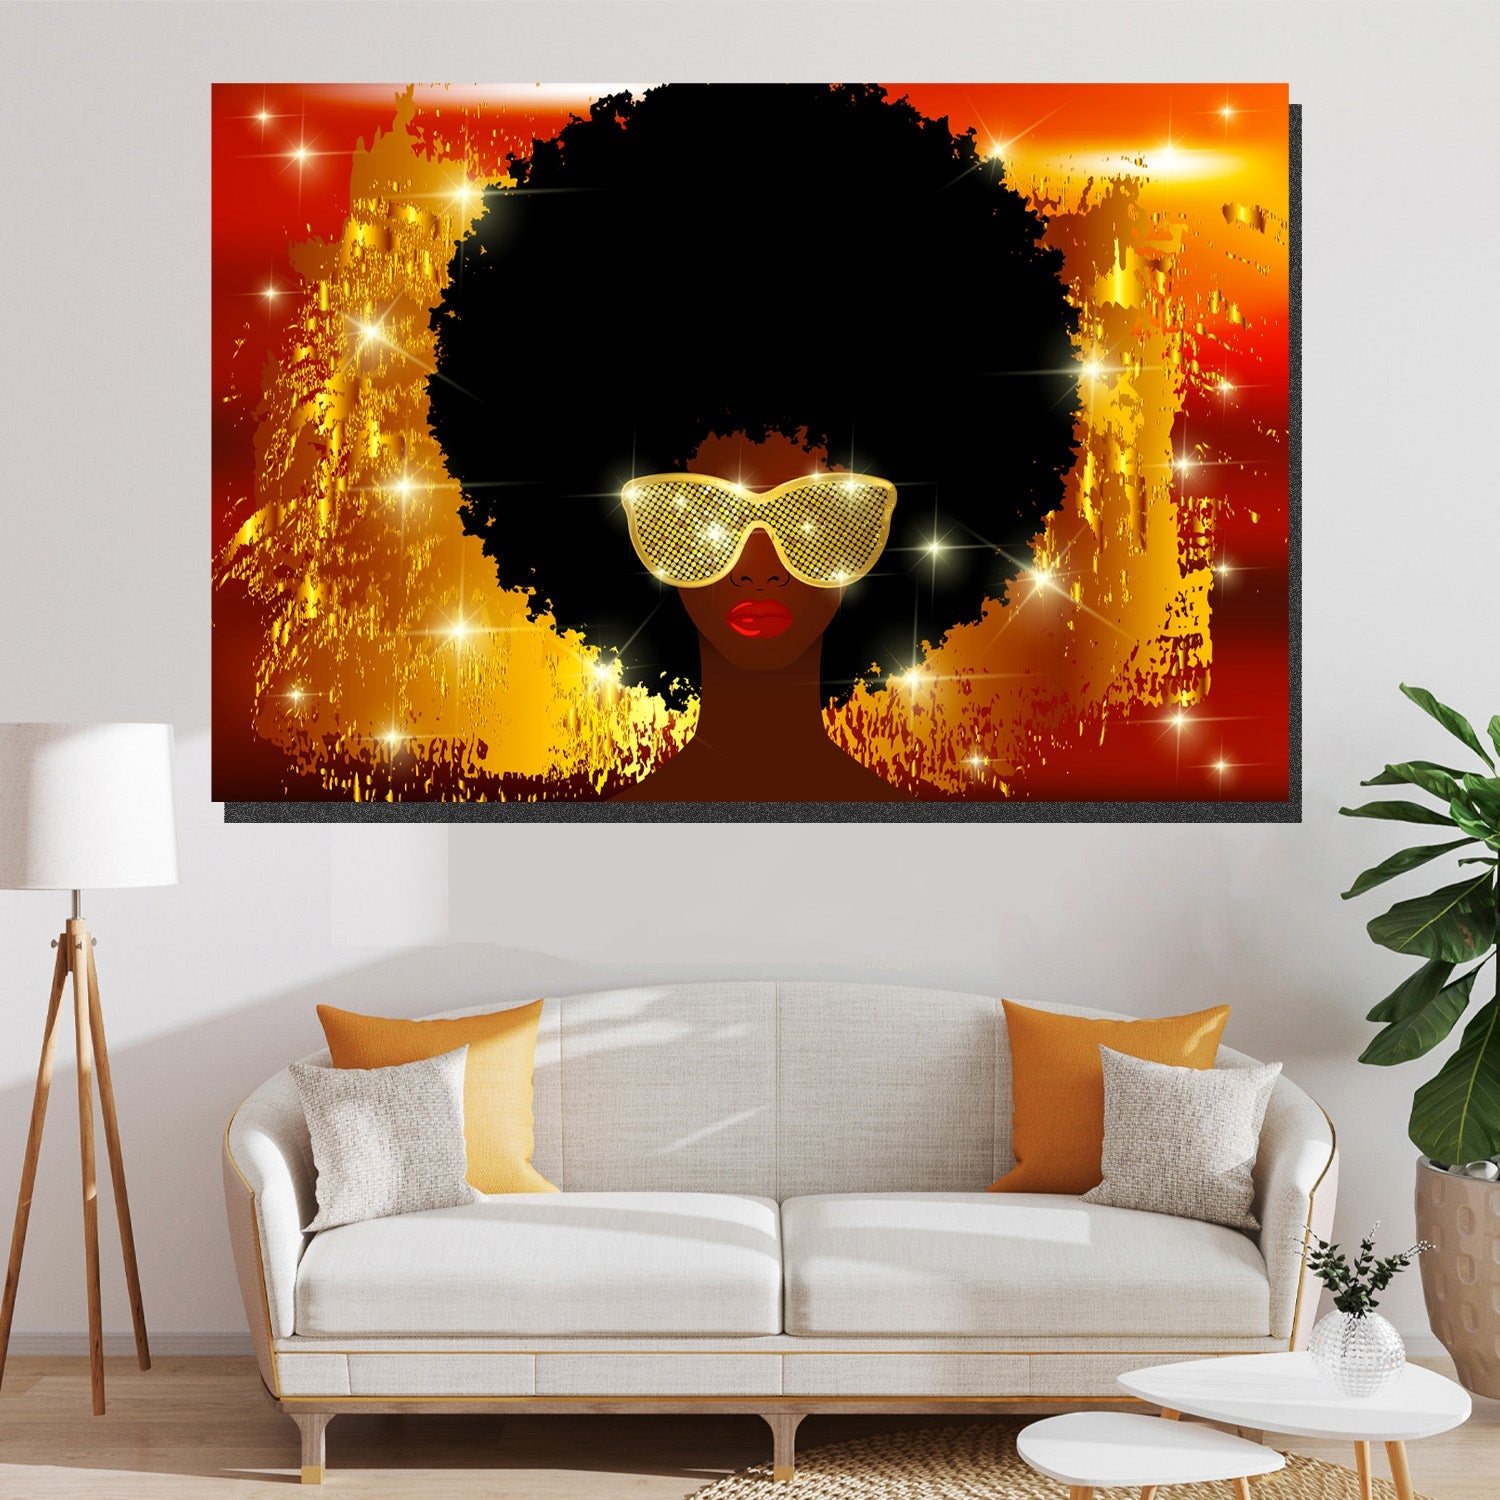 https://cdn.shopify.com/s/files/1/0387/9986/8044/products/GlamorousAfricanWomanCanvasArtprintStretched.jpg